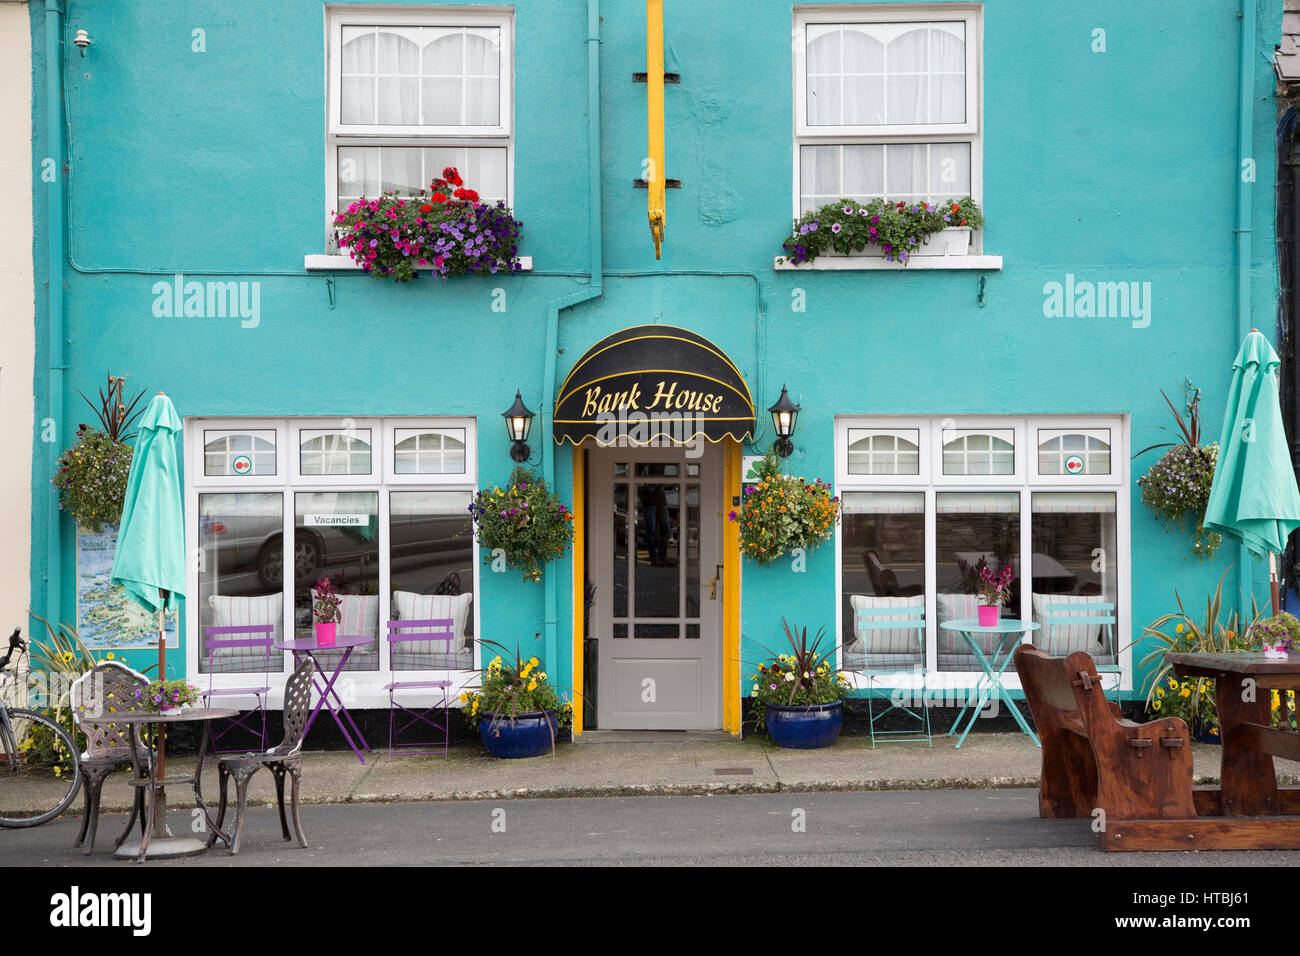 Bank House Cafe Exterieur in Sneem, entlang des Ring of Kerry, County Kerry, Irland Stockfoto